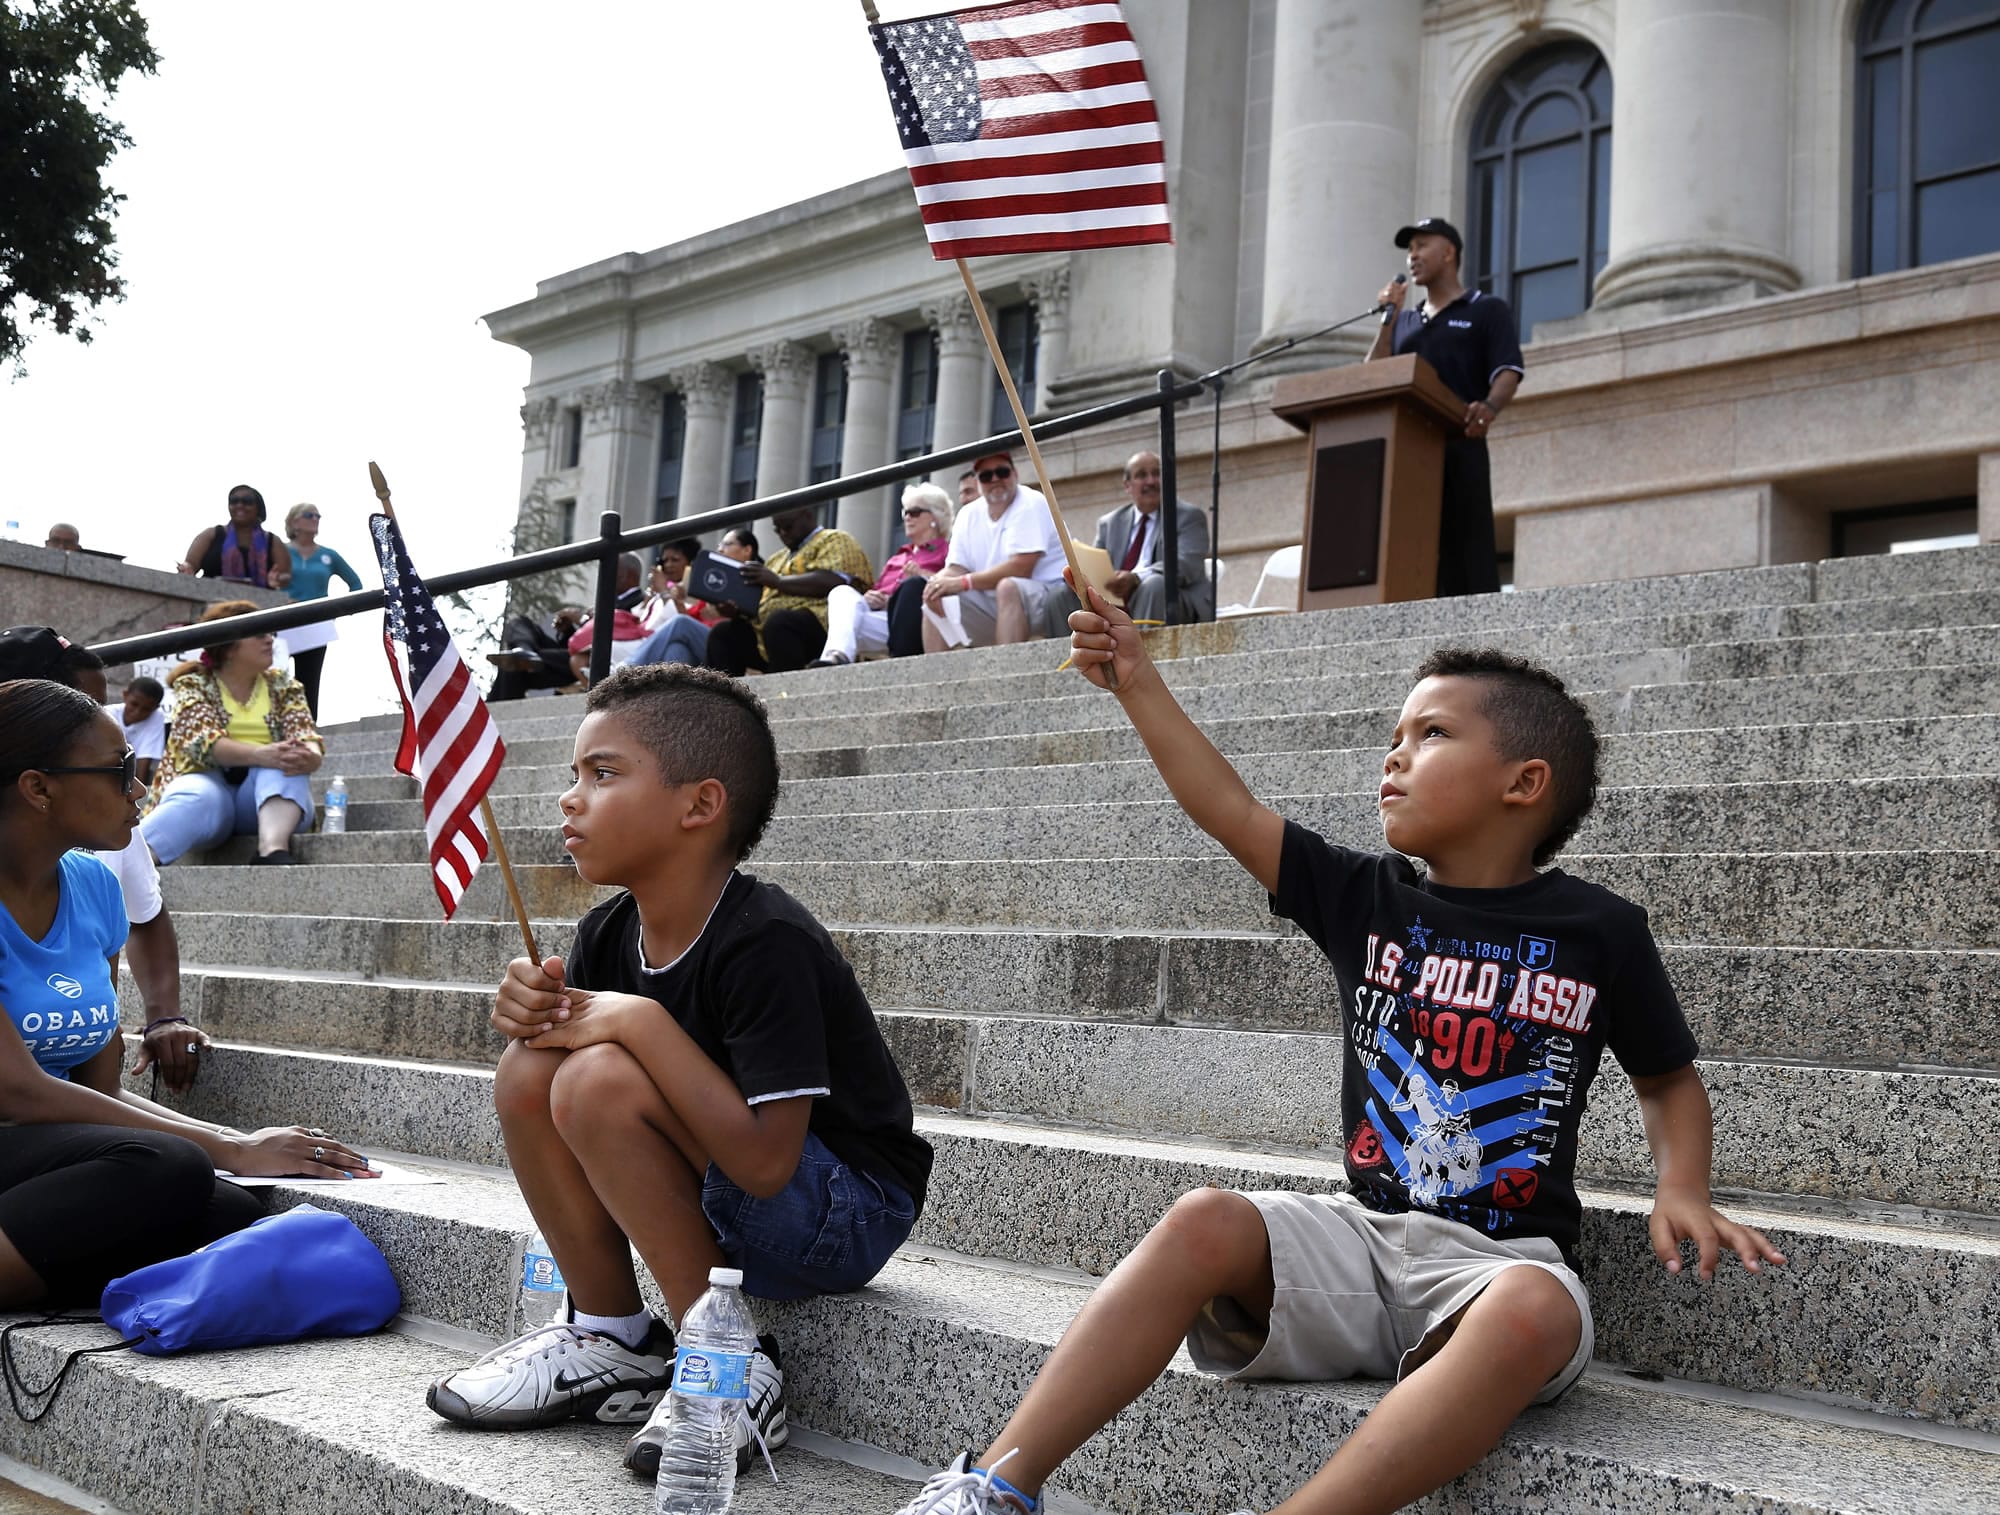 Dejuan Monroe, 7, waves an American flag in the air while a speaker addresses the crowd. Dejuan and his older brother Darian, 9, moved to the front of the crowd and found a good view of the rally on the north steps of the Capitol.